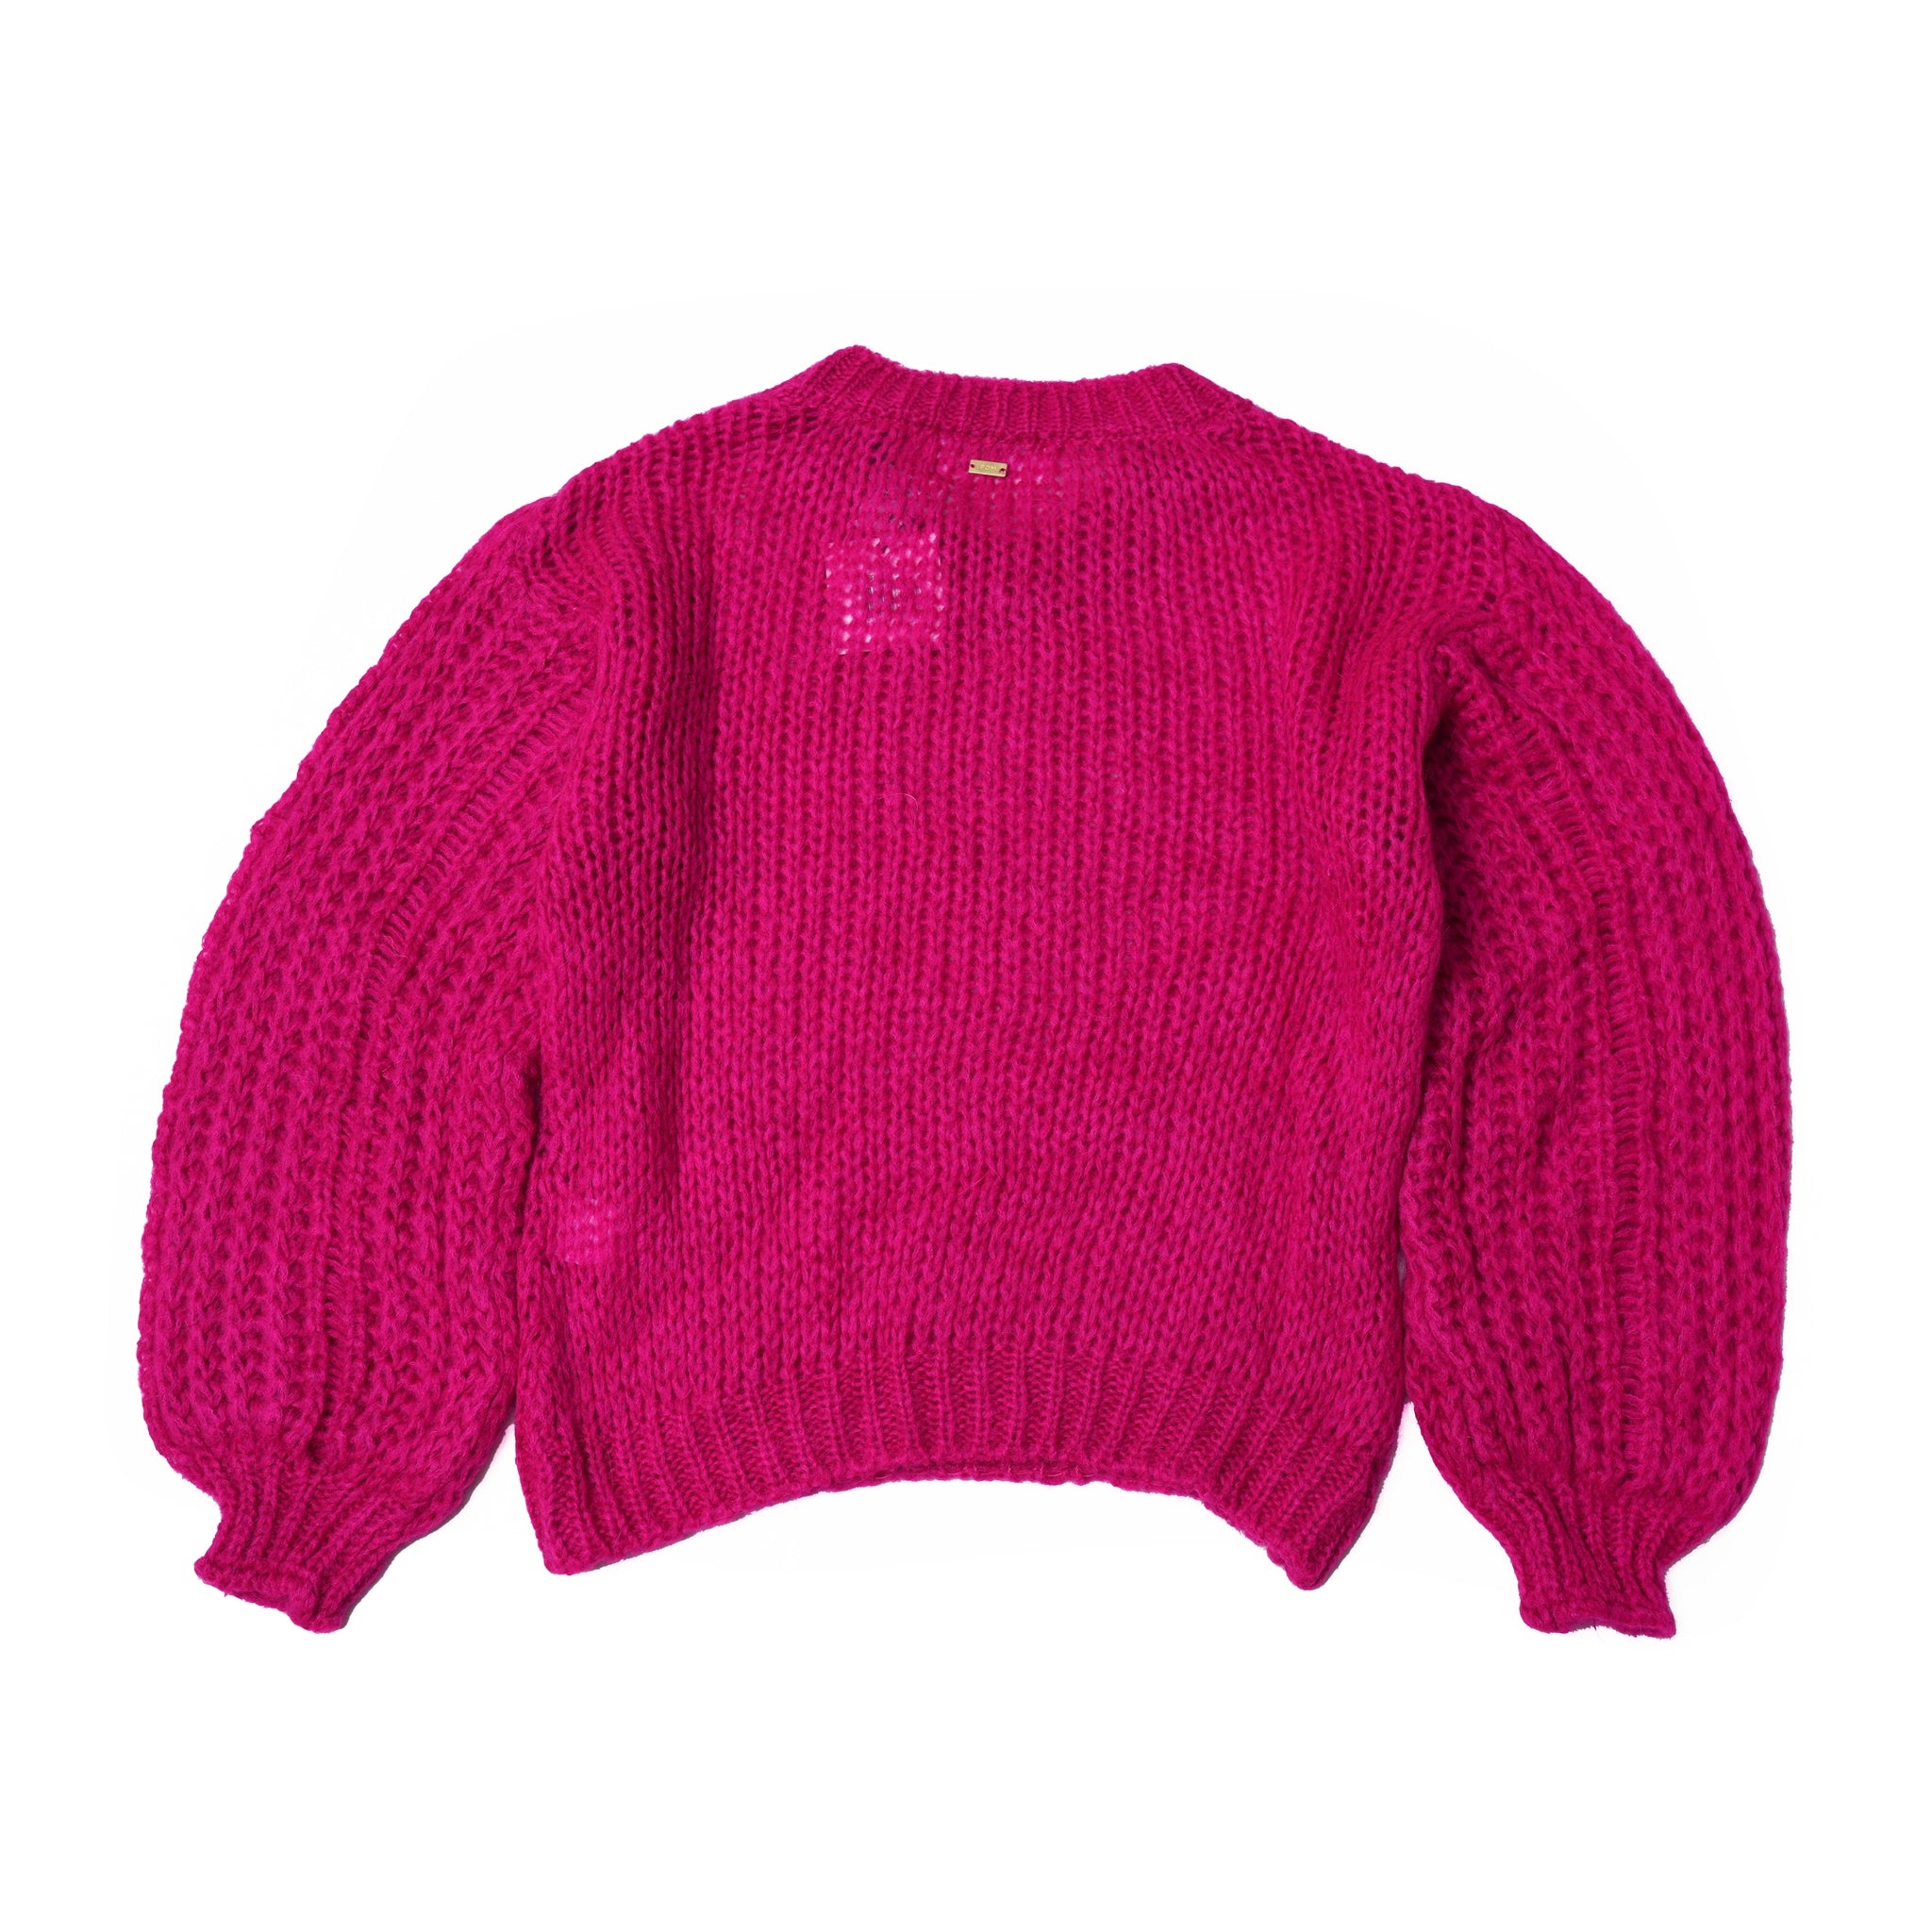 No:SP7440 | Name:PULLOVER | Color:Fiery Pink【POM AMSTERDAM_ポムアムステルダム】